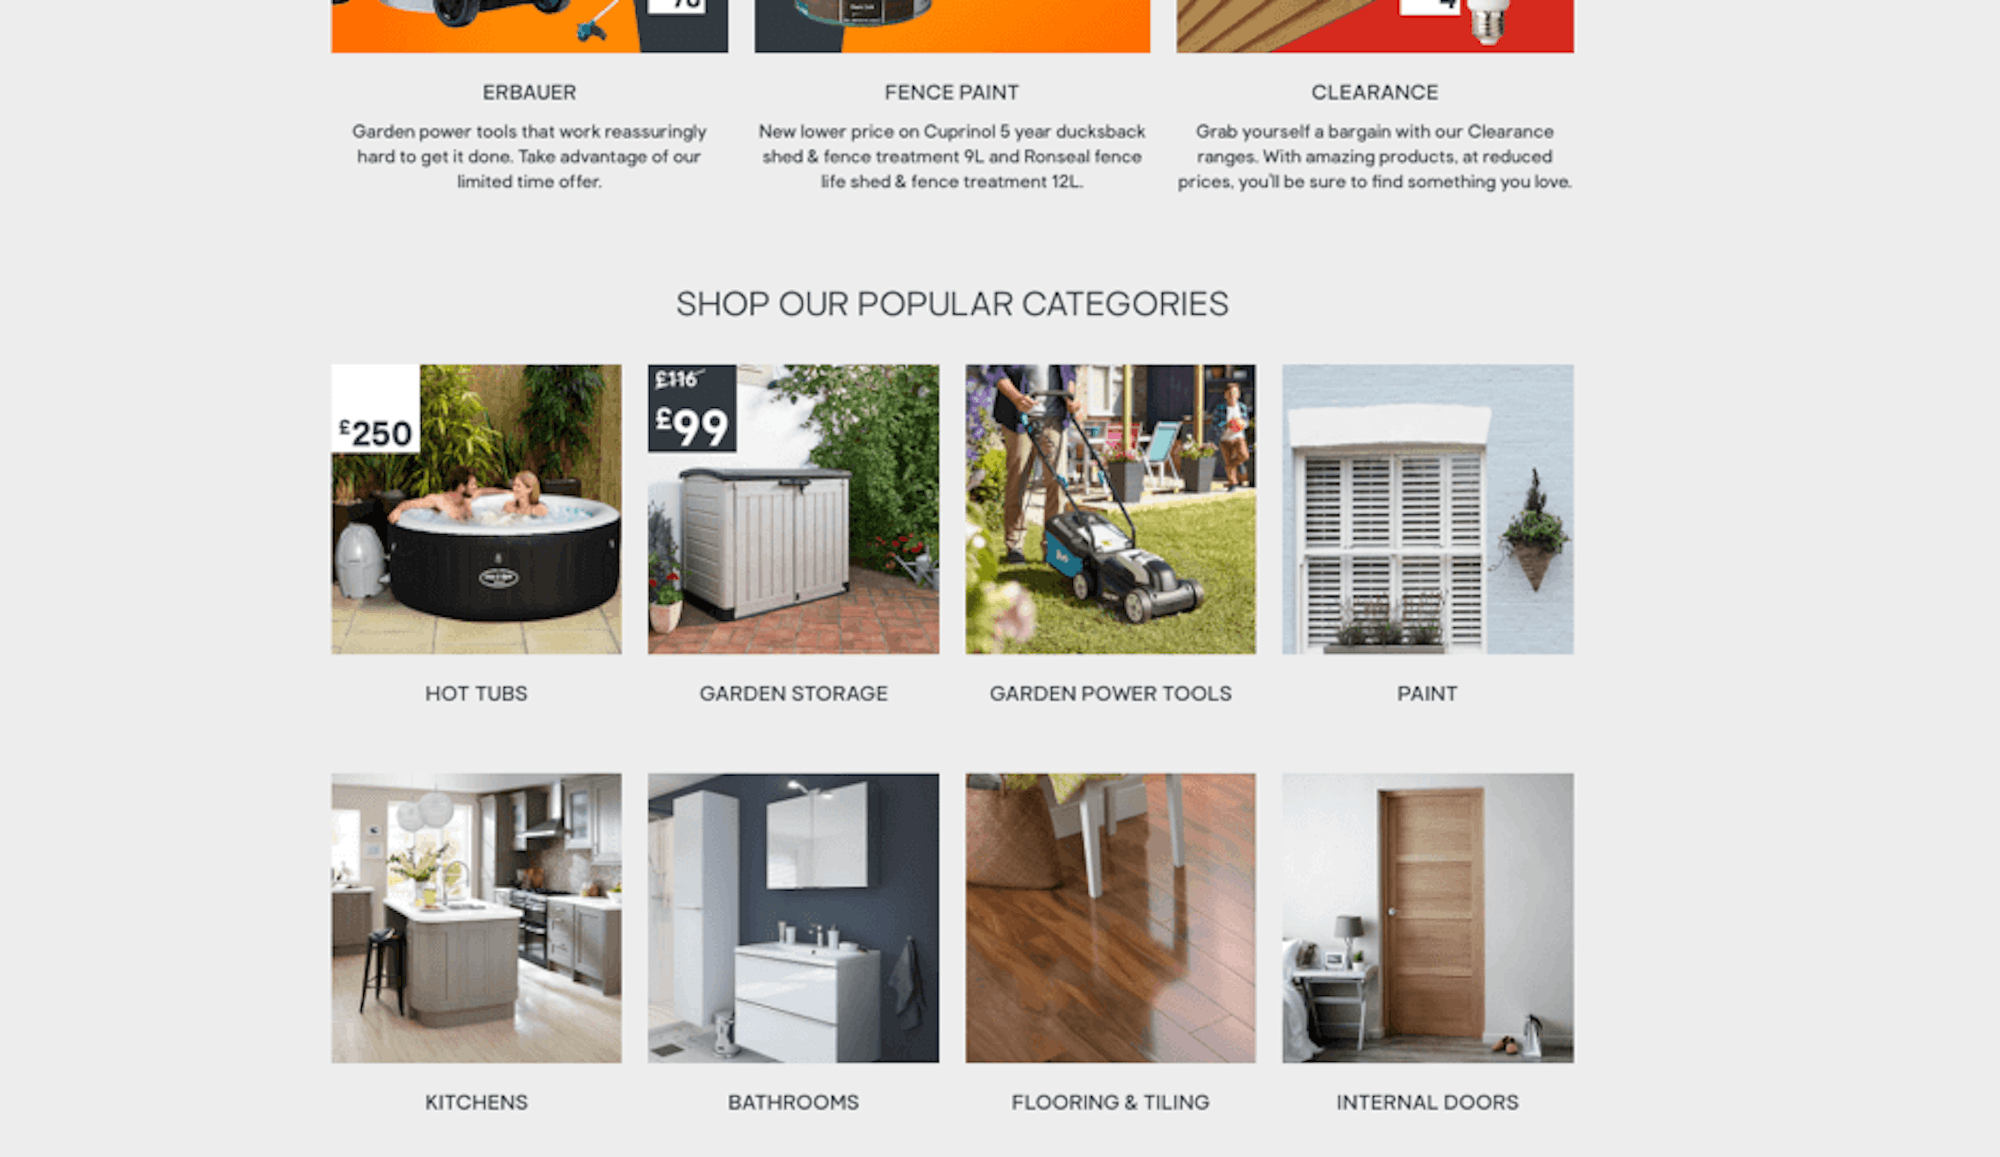 B&Q's home page. Prioritieses categories well.